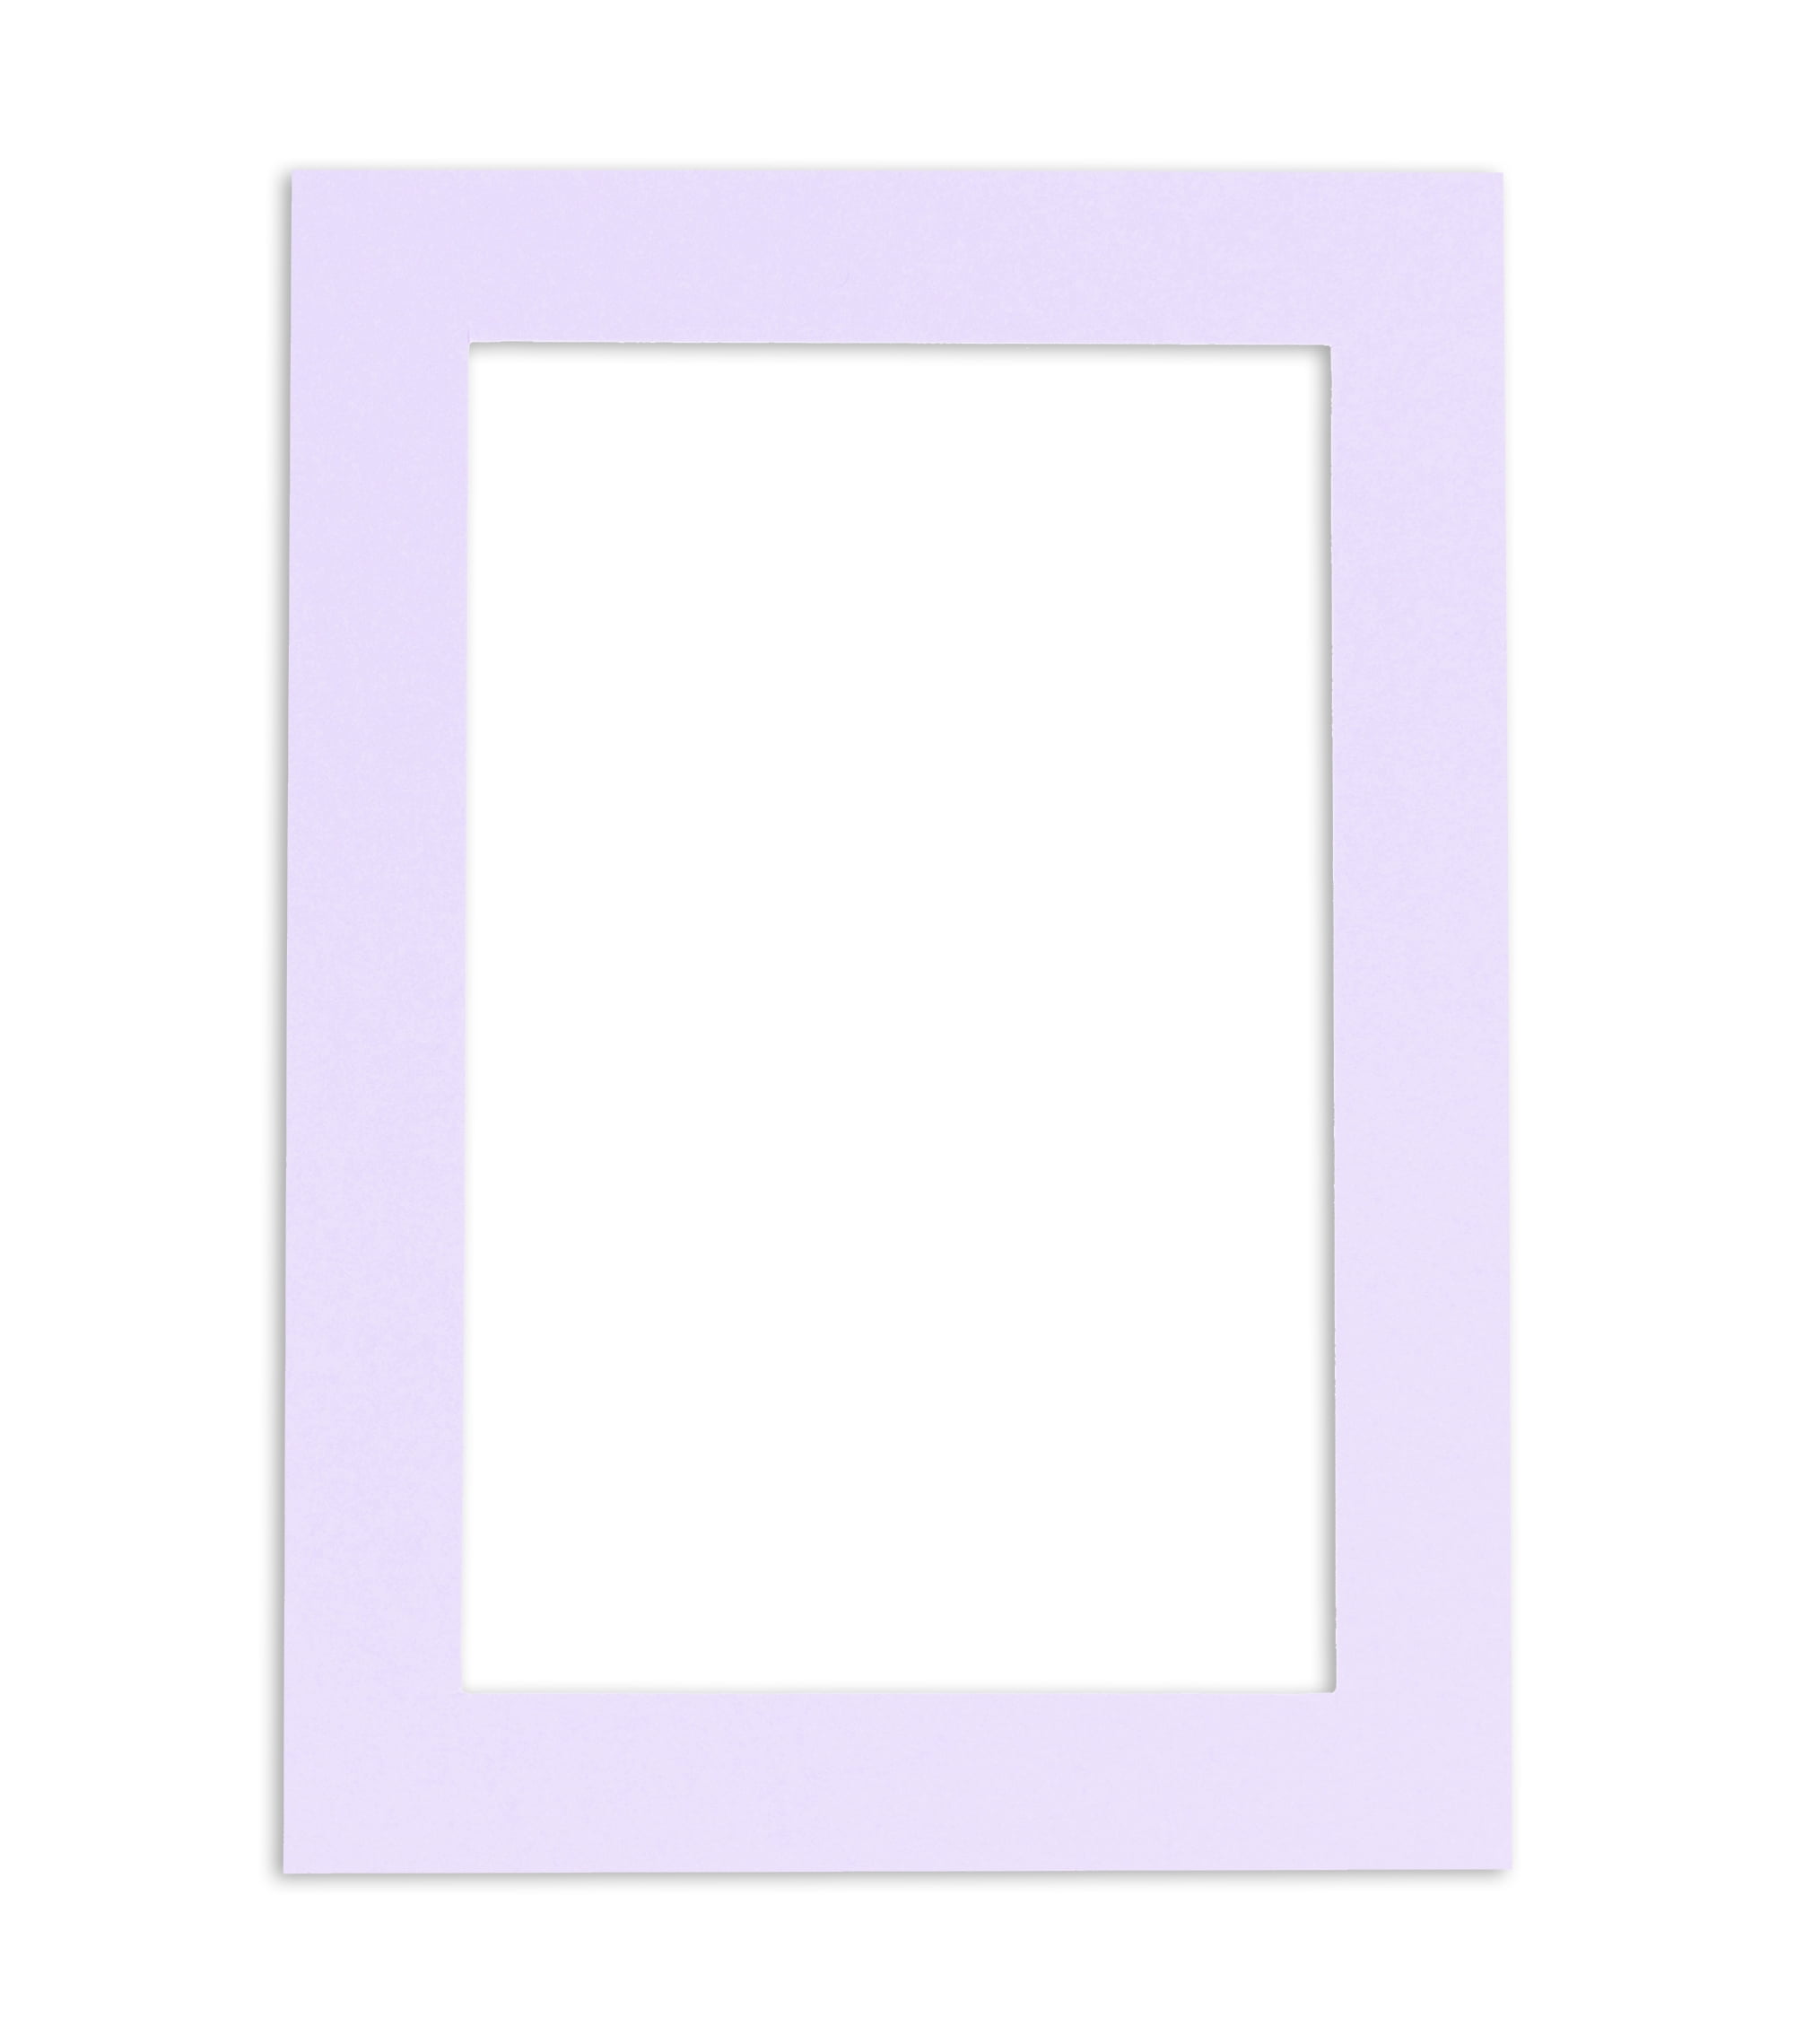 Royal Blue Acid Free 8x10 Picture Frame Mats with White Core Bevel